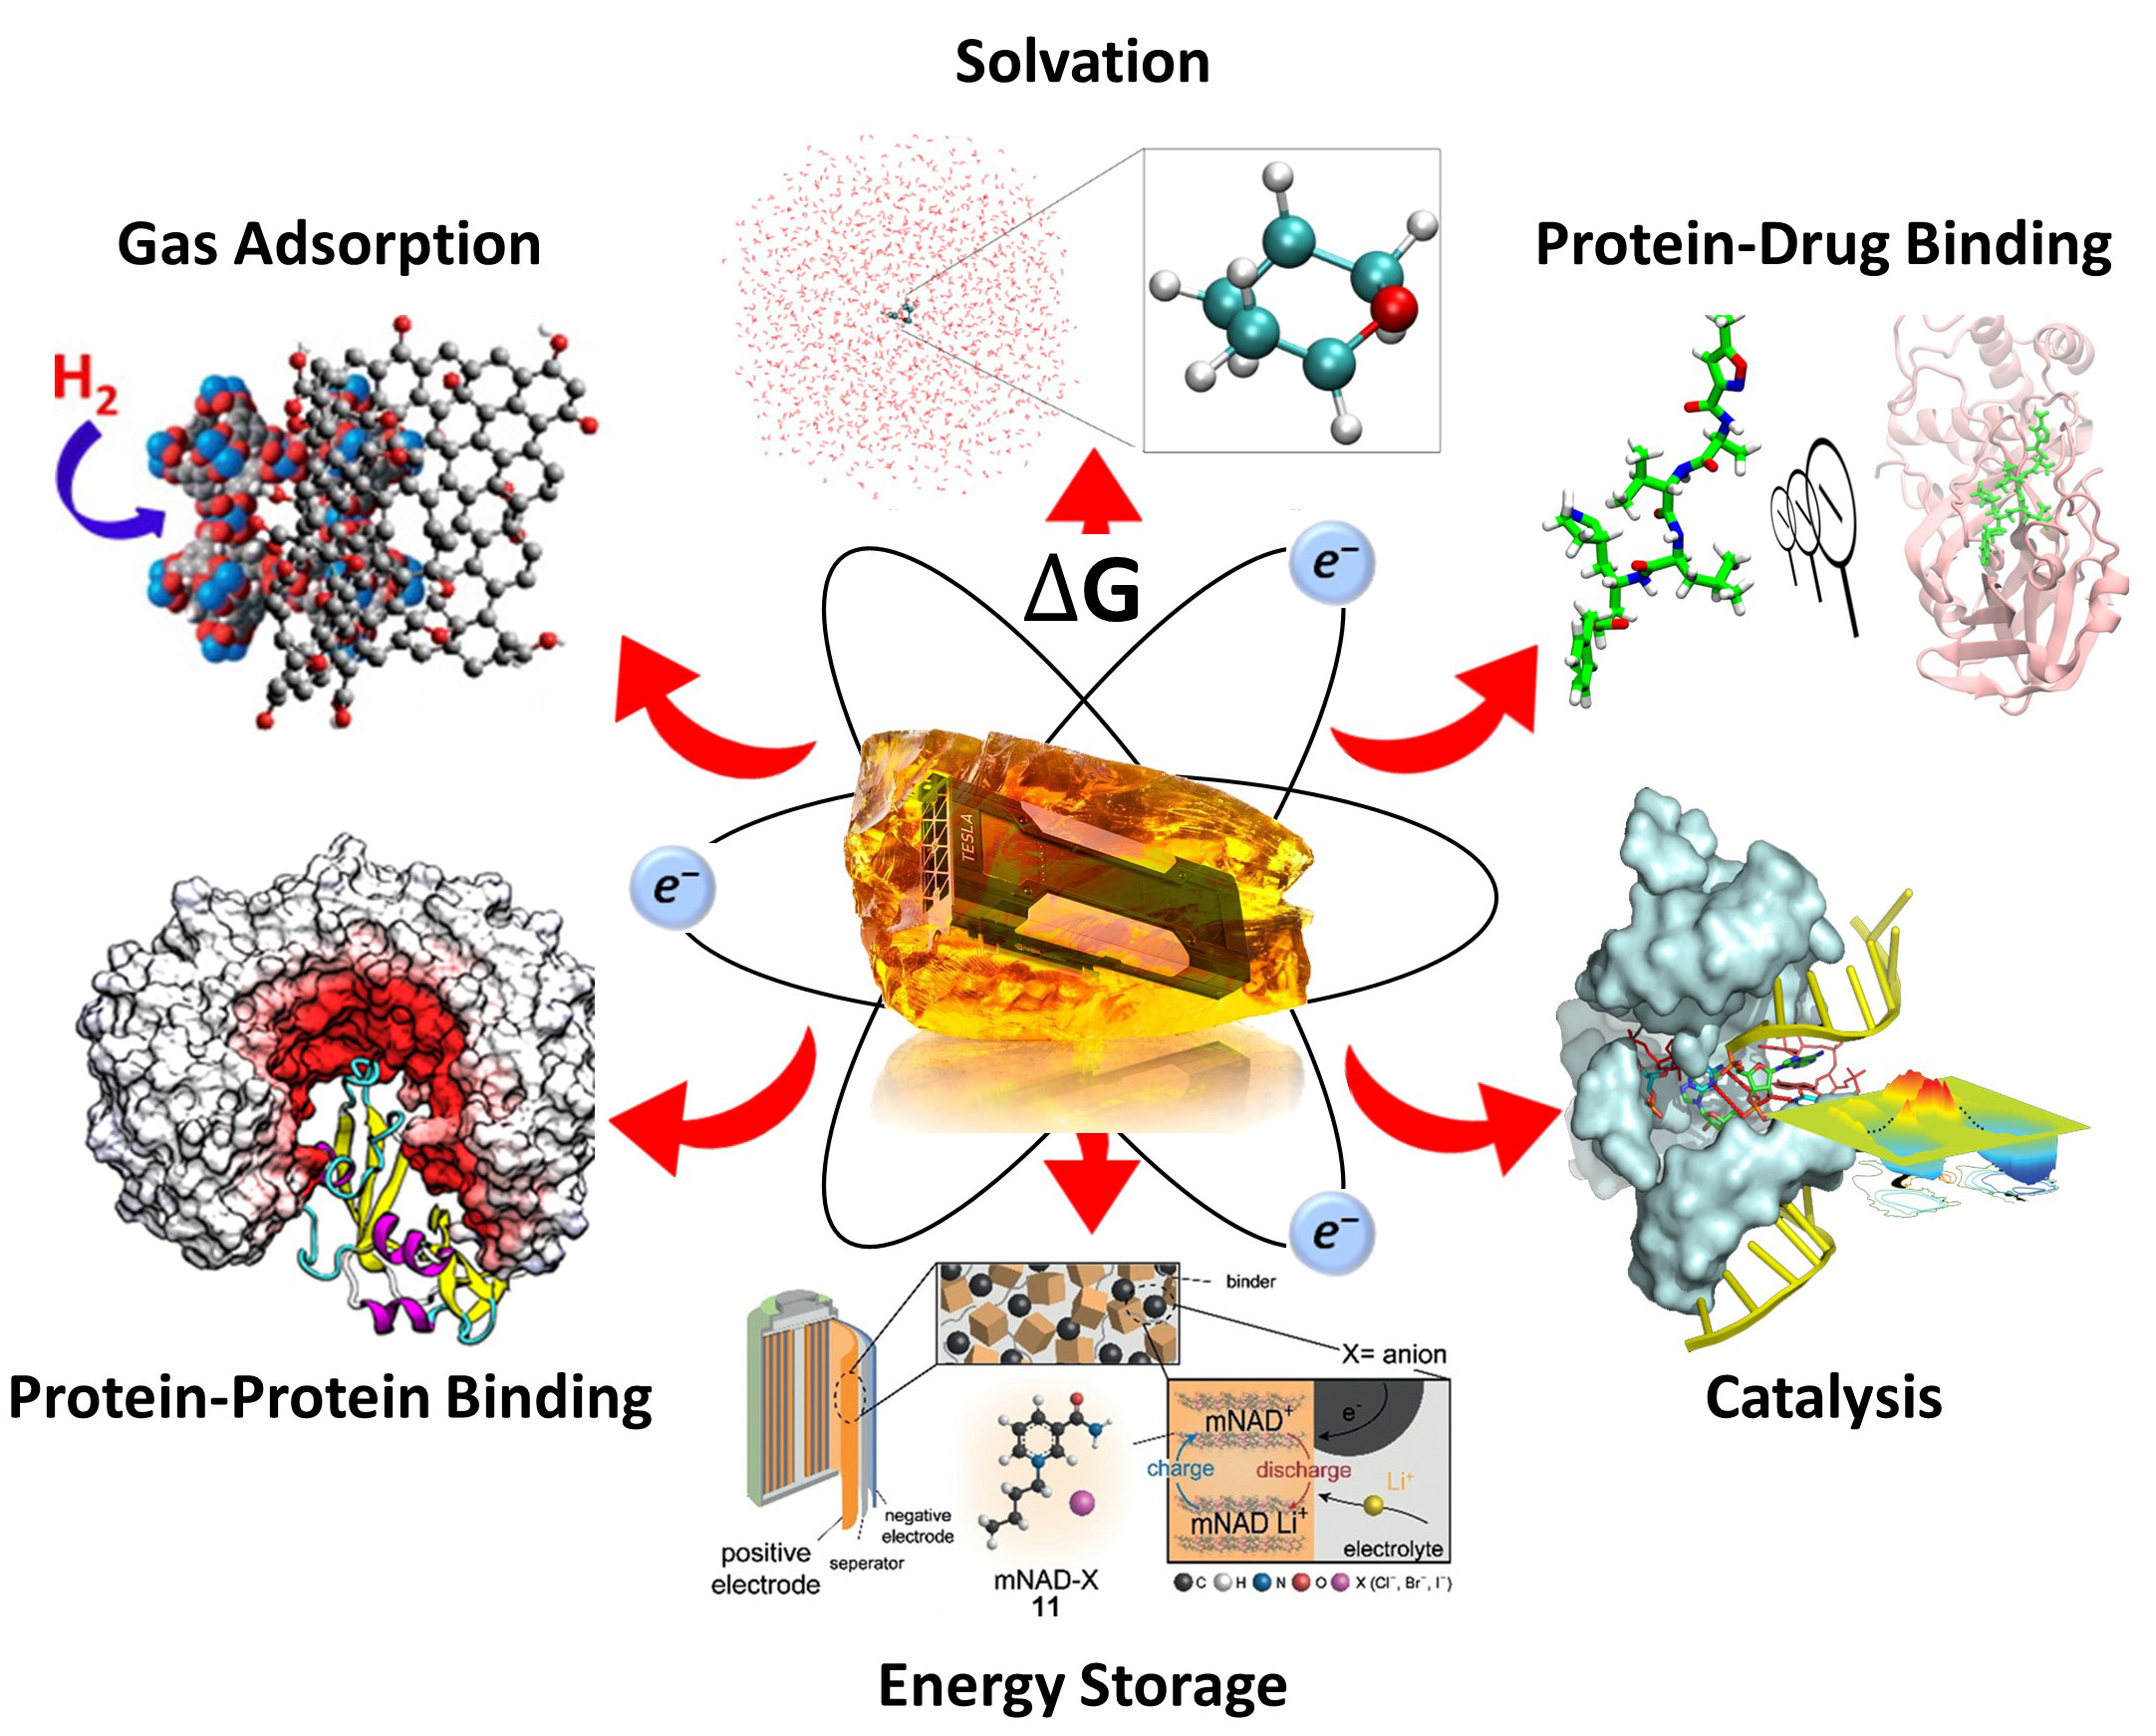 An illustration of the fields of chemistry that use Amber, represented at the center of the image as graphics processing unit encased in amber and orbited by electrons (as if it were an atom’s nucleus). The applications presented are solvation, protein-drug binding, catalysis, energy storage, protein-protein binding and gas adsorption.